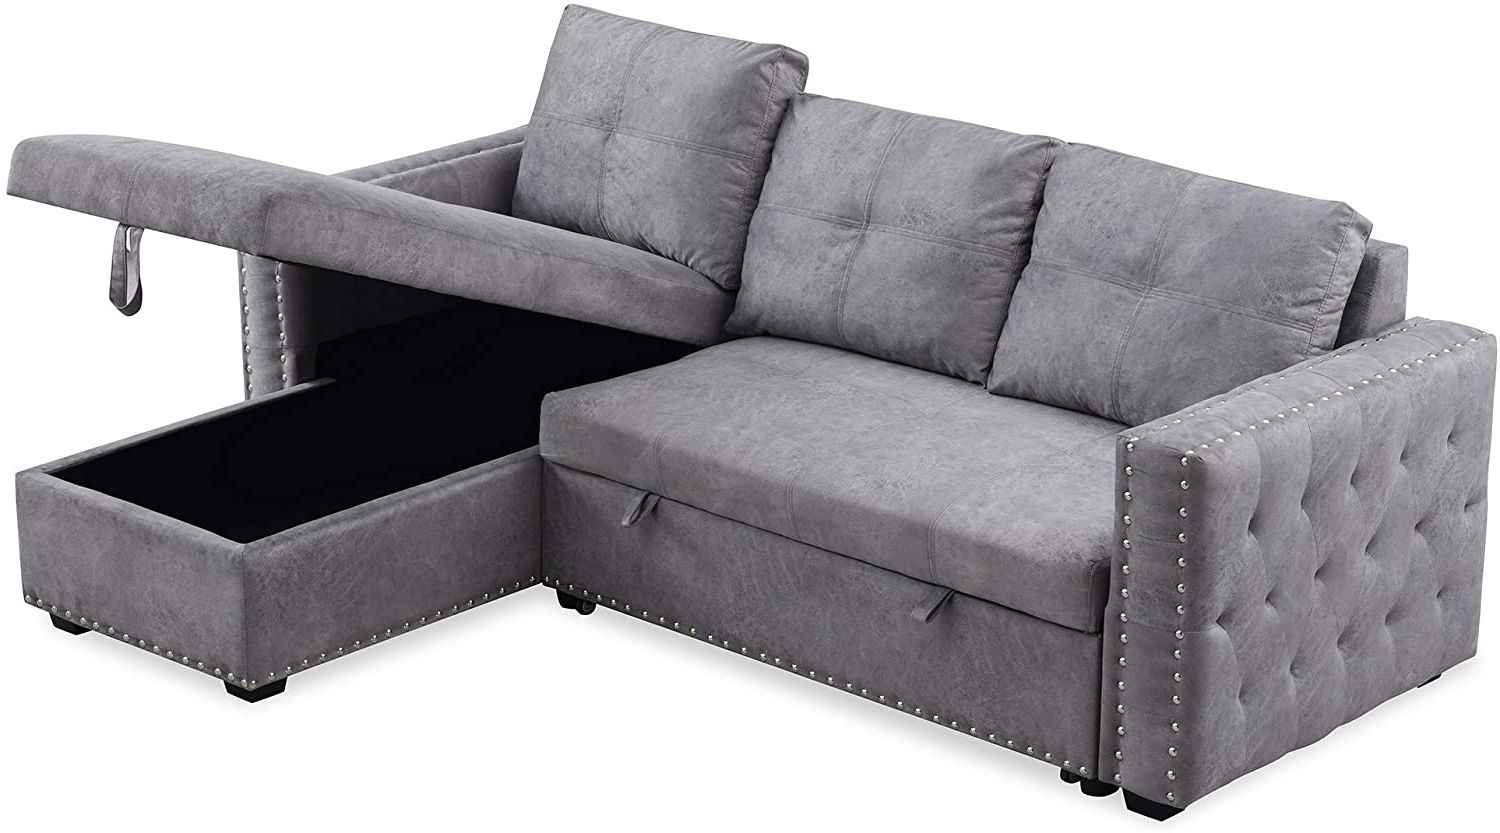 Wholesale 91" Reversible Sleeper Sectional Sofa 3 Seat With Nail Head Throughout 3 In 1 Gray Pull Out Sleeper Sofas (View 10 of 20)